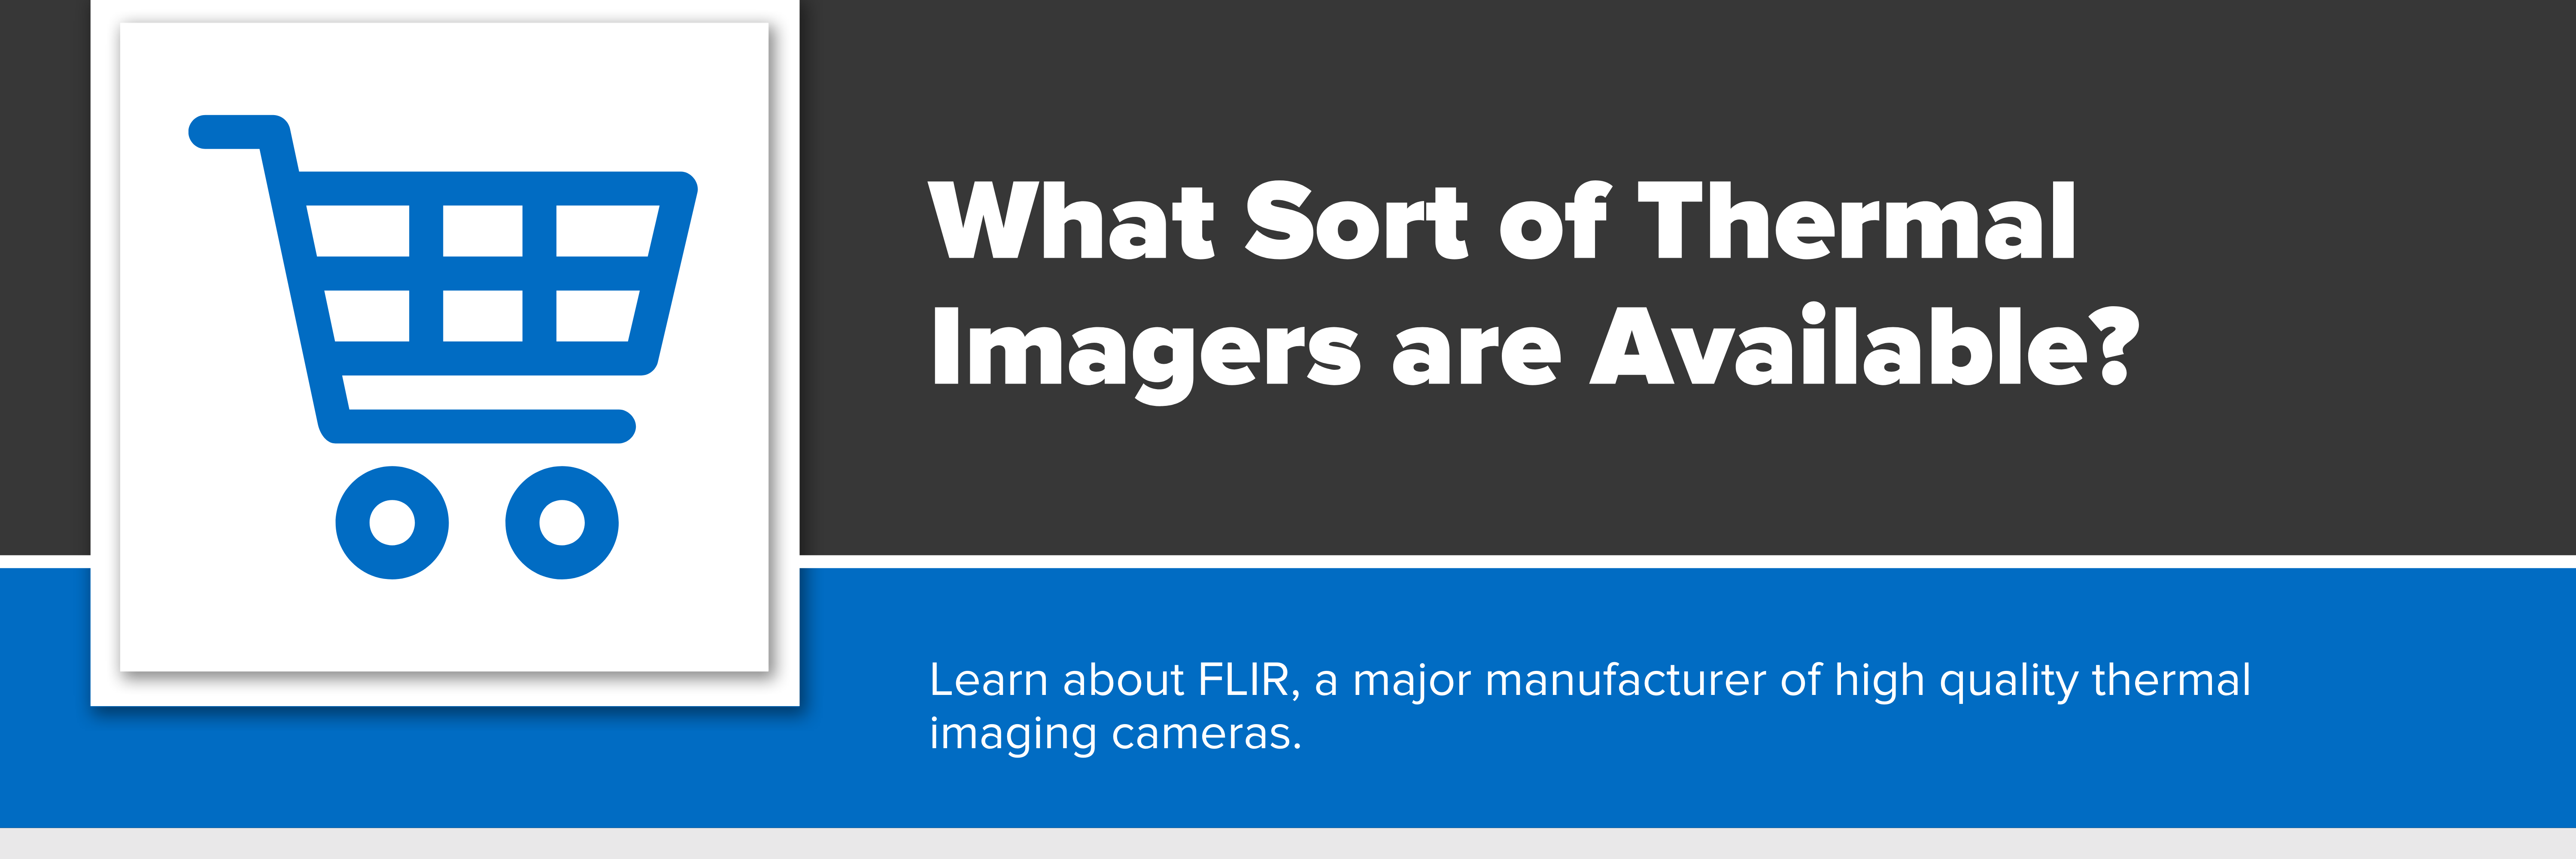 Header image with text "What Sort of Thermal Imagers are Available?"